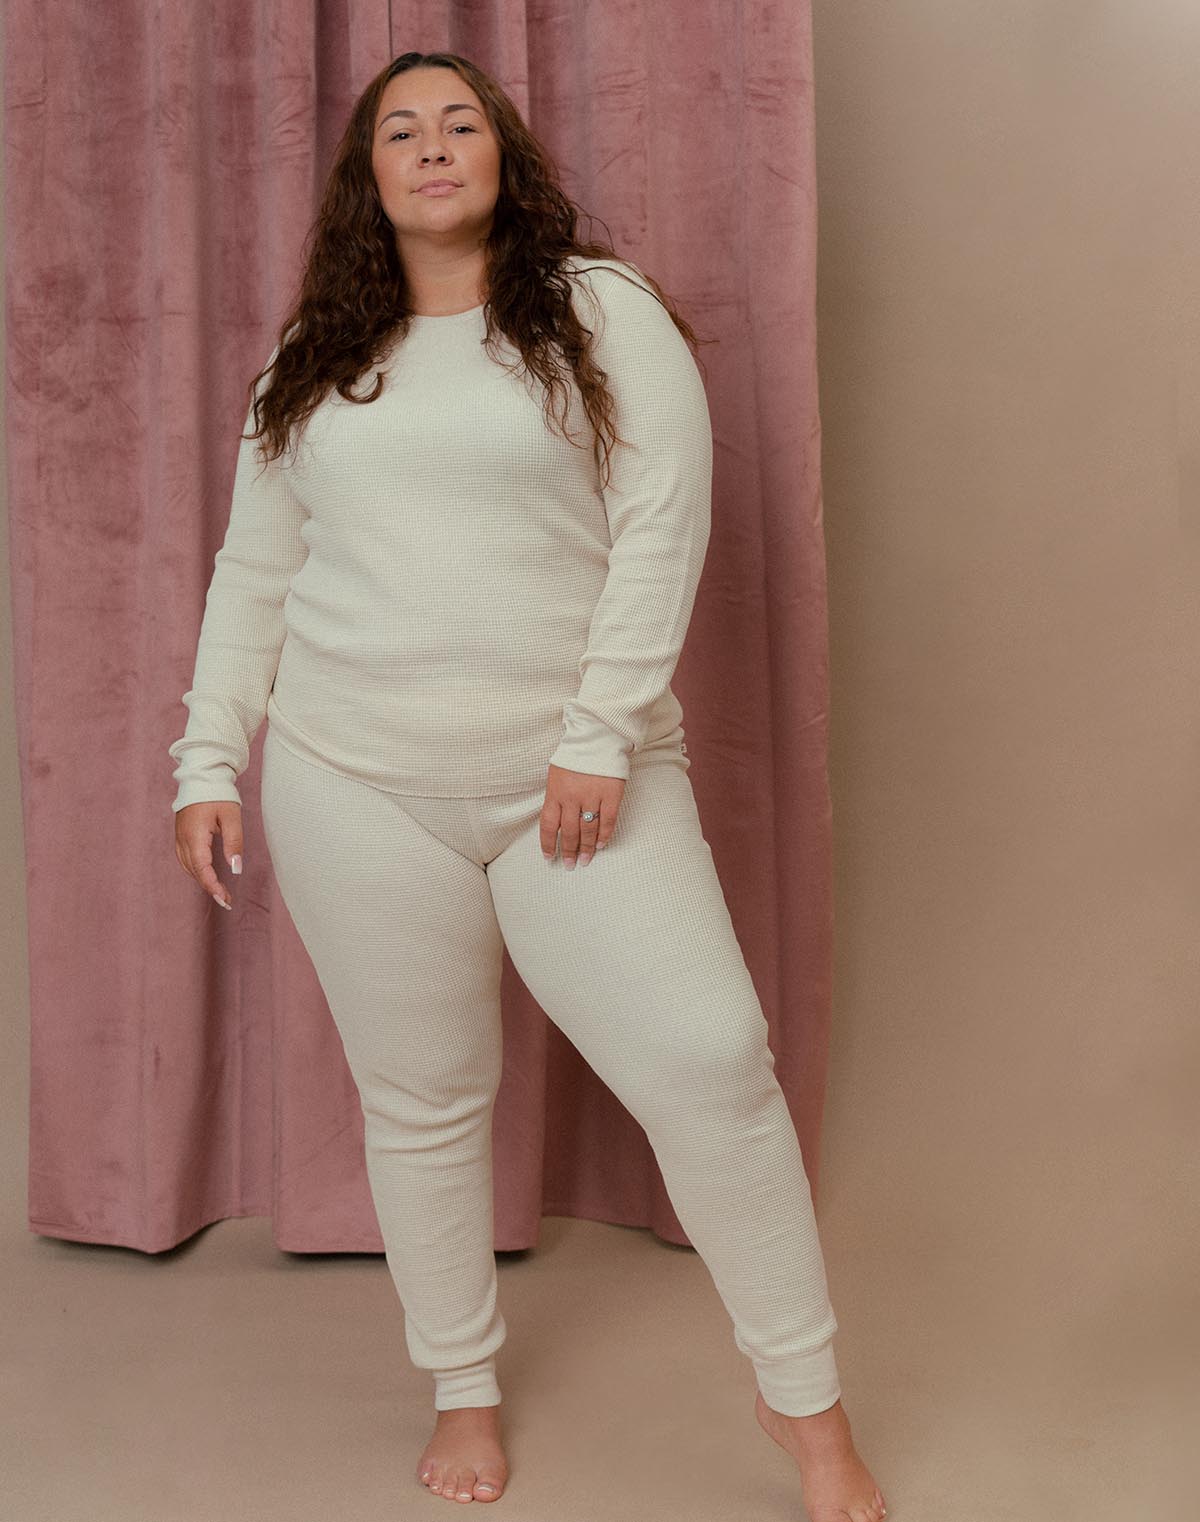 These Waffle Long-Sleeve Tops are made with the softest organic Pima Cotton and eco-friendly dye. They're perfect for everyday wear with jeans, worn as base layers in the winter, or paired with the Waffle Bottom for bedtime.